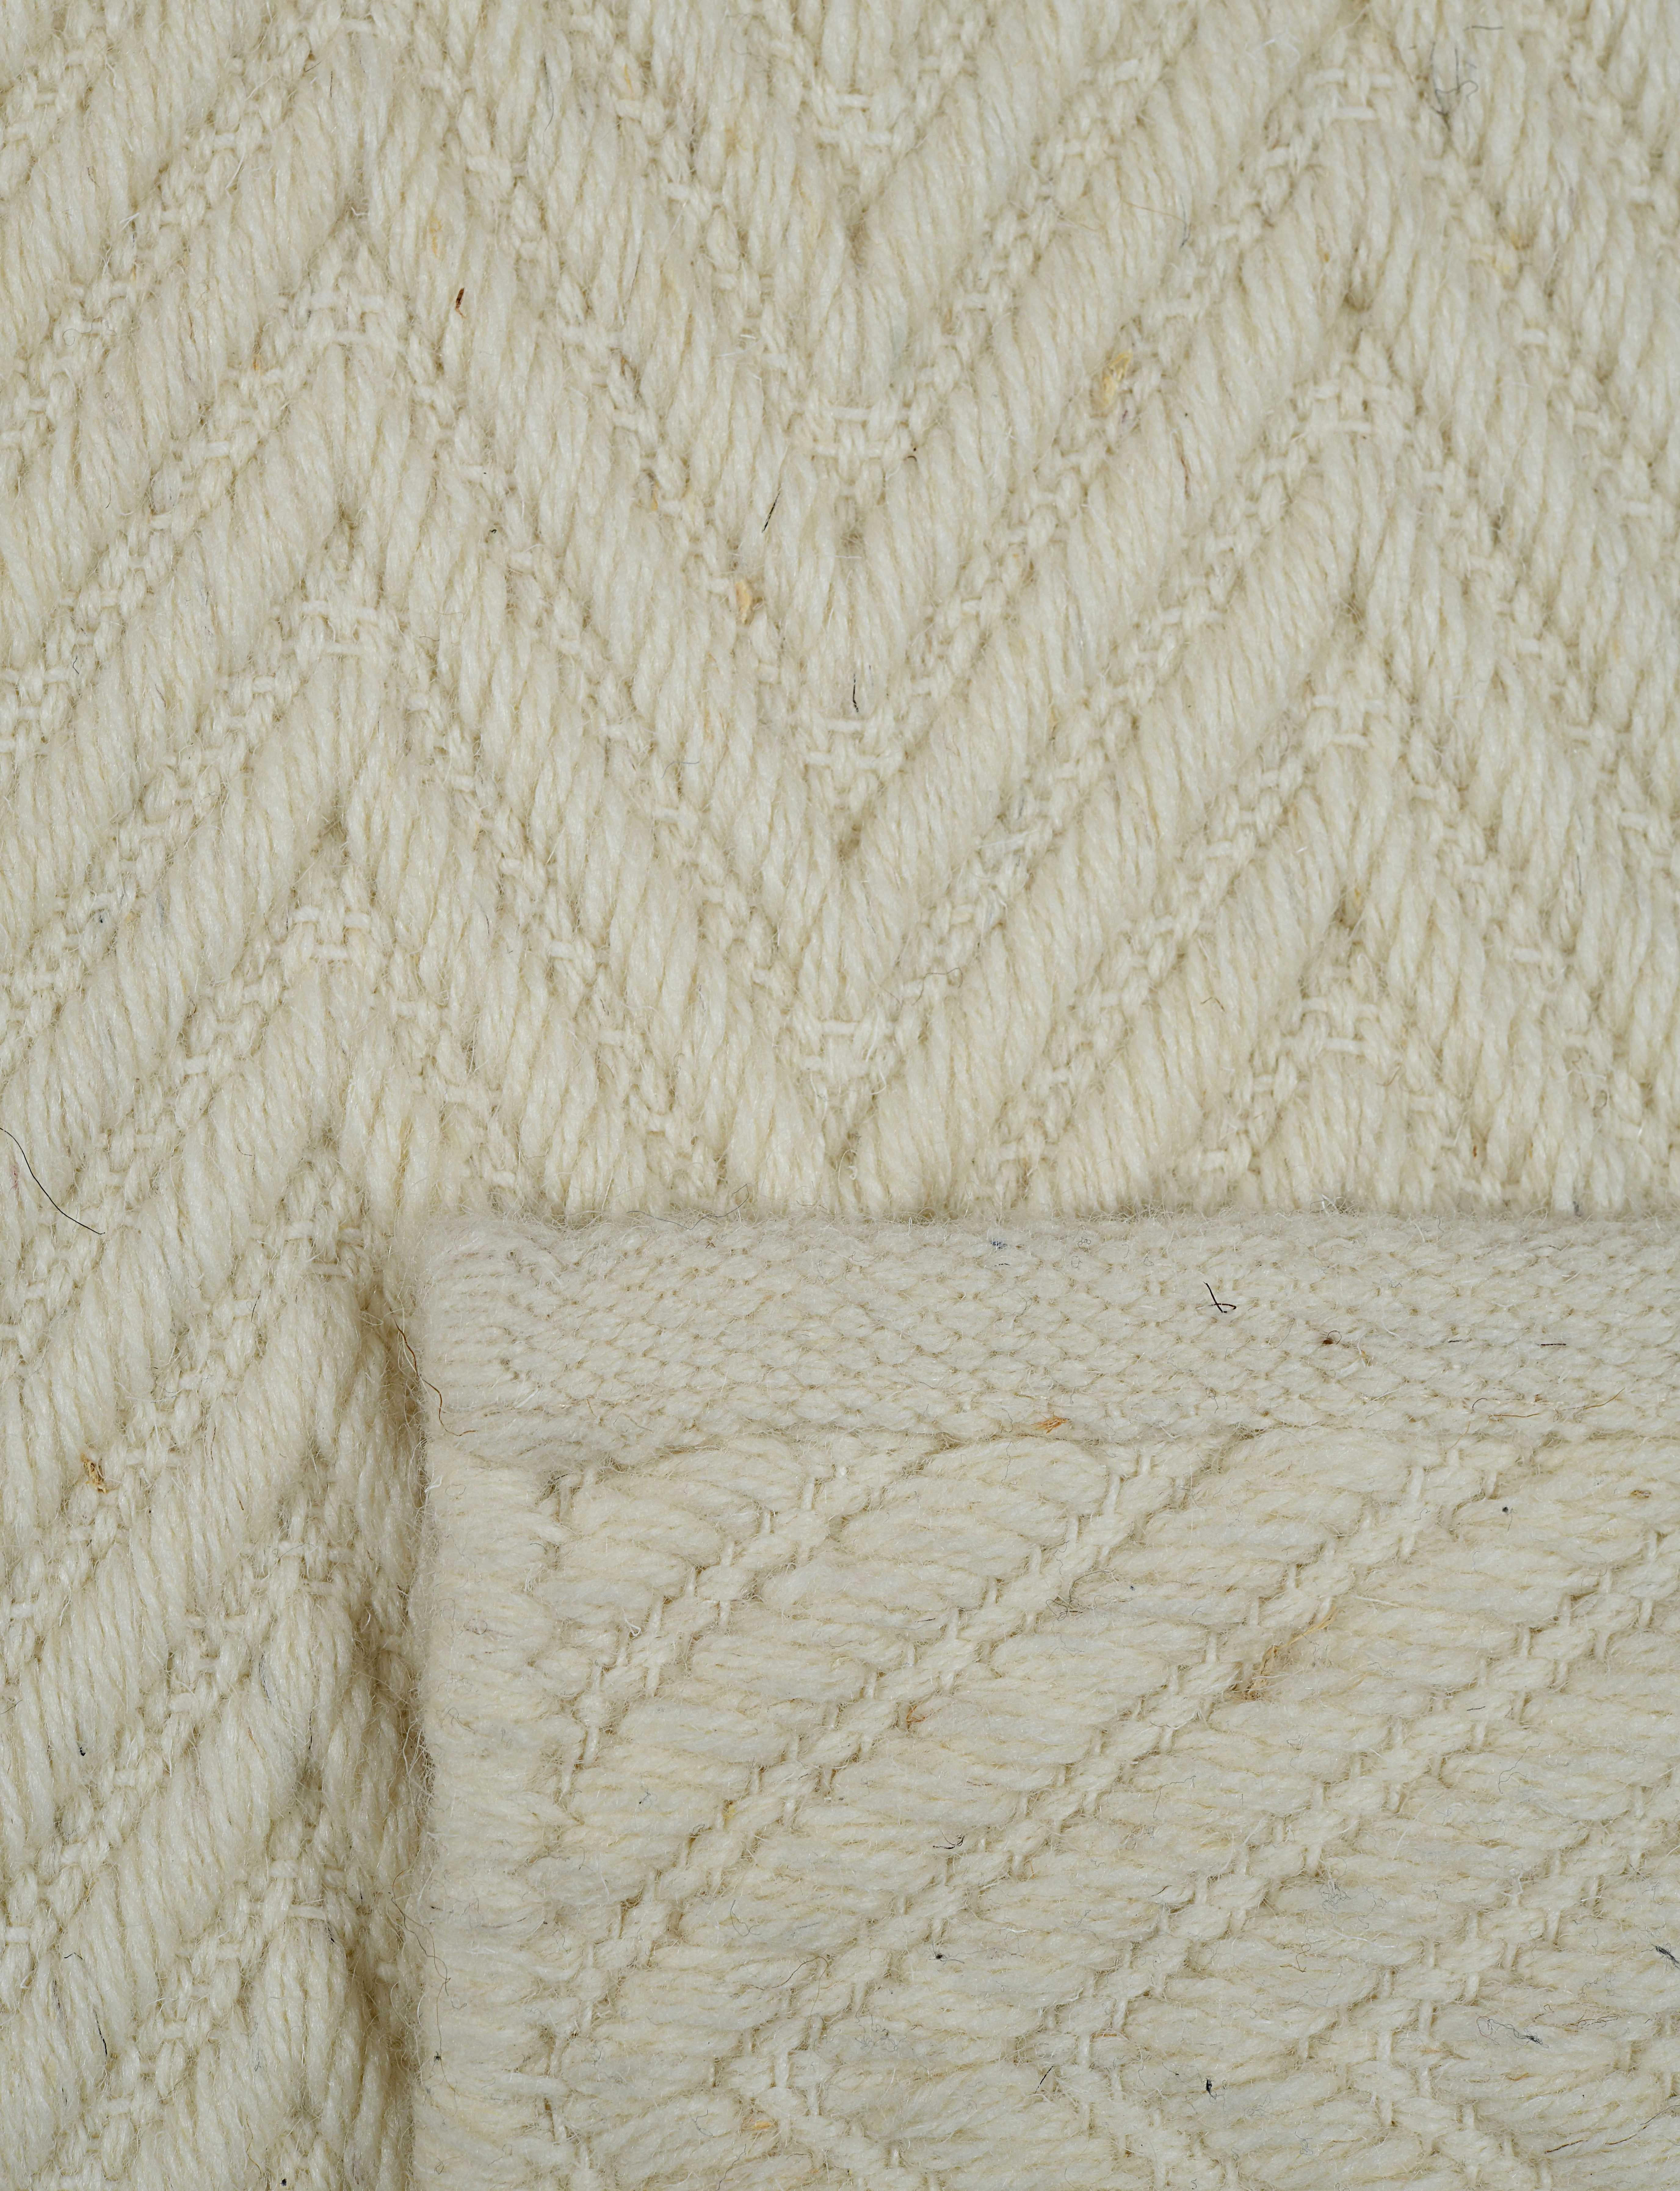 Indian Lanx, Ivory, Handwoven Face 60% Undyed NZ Wool, 40% Undyed MED Wool, 8' x 10' For Sale